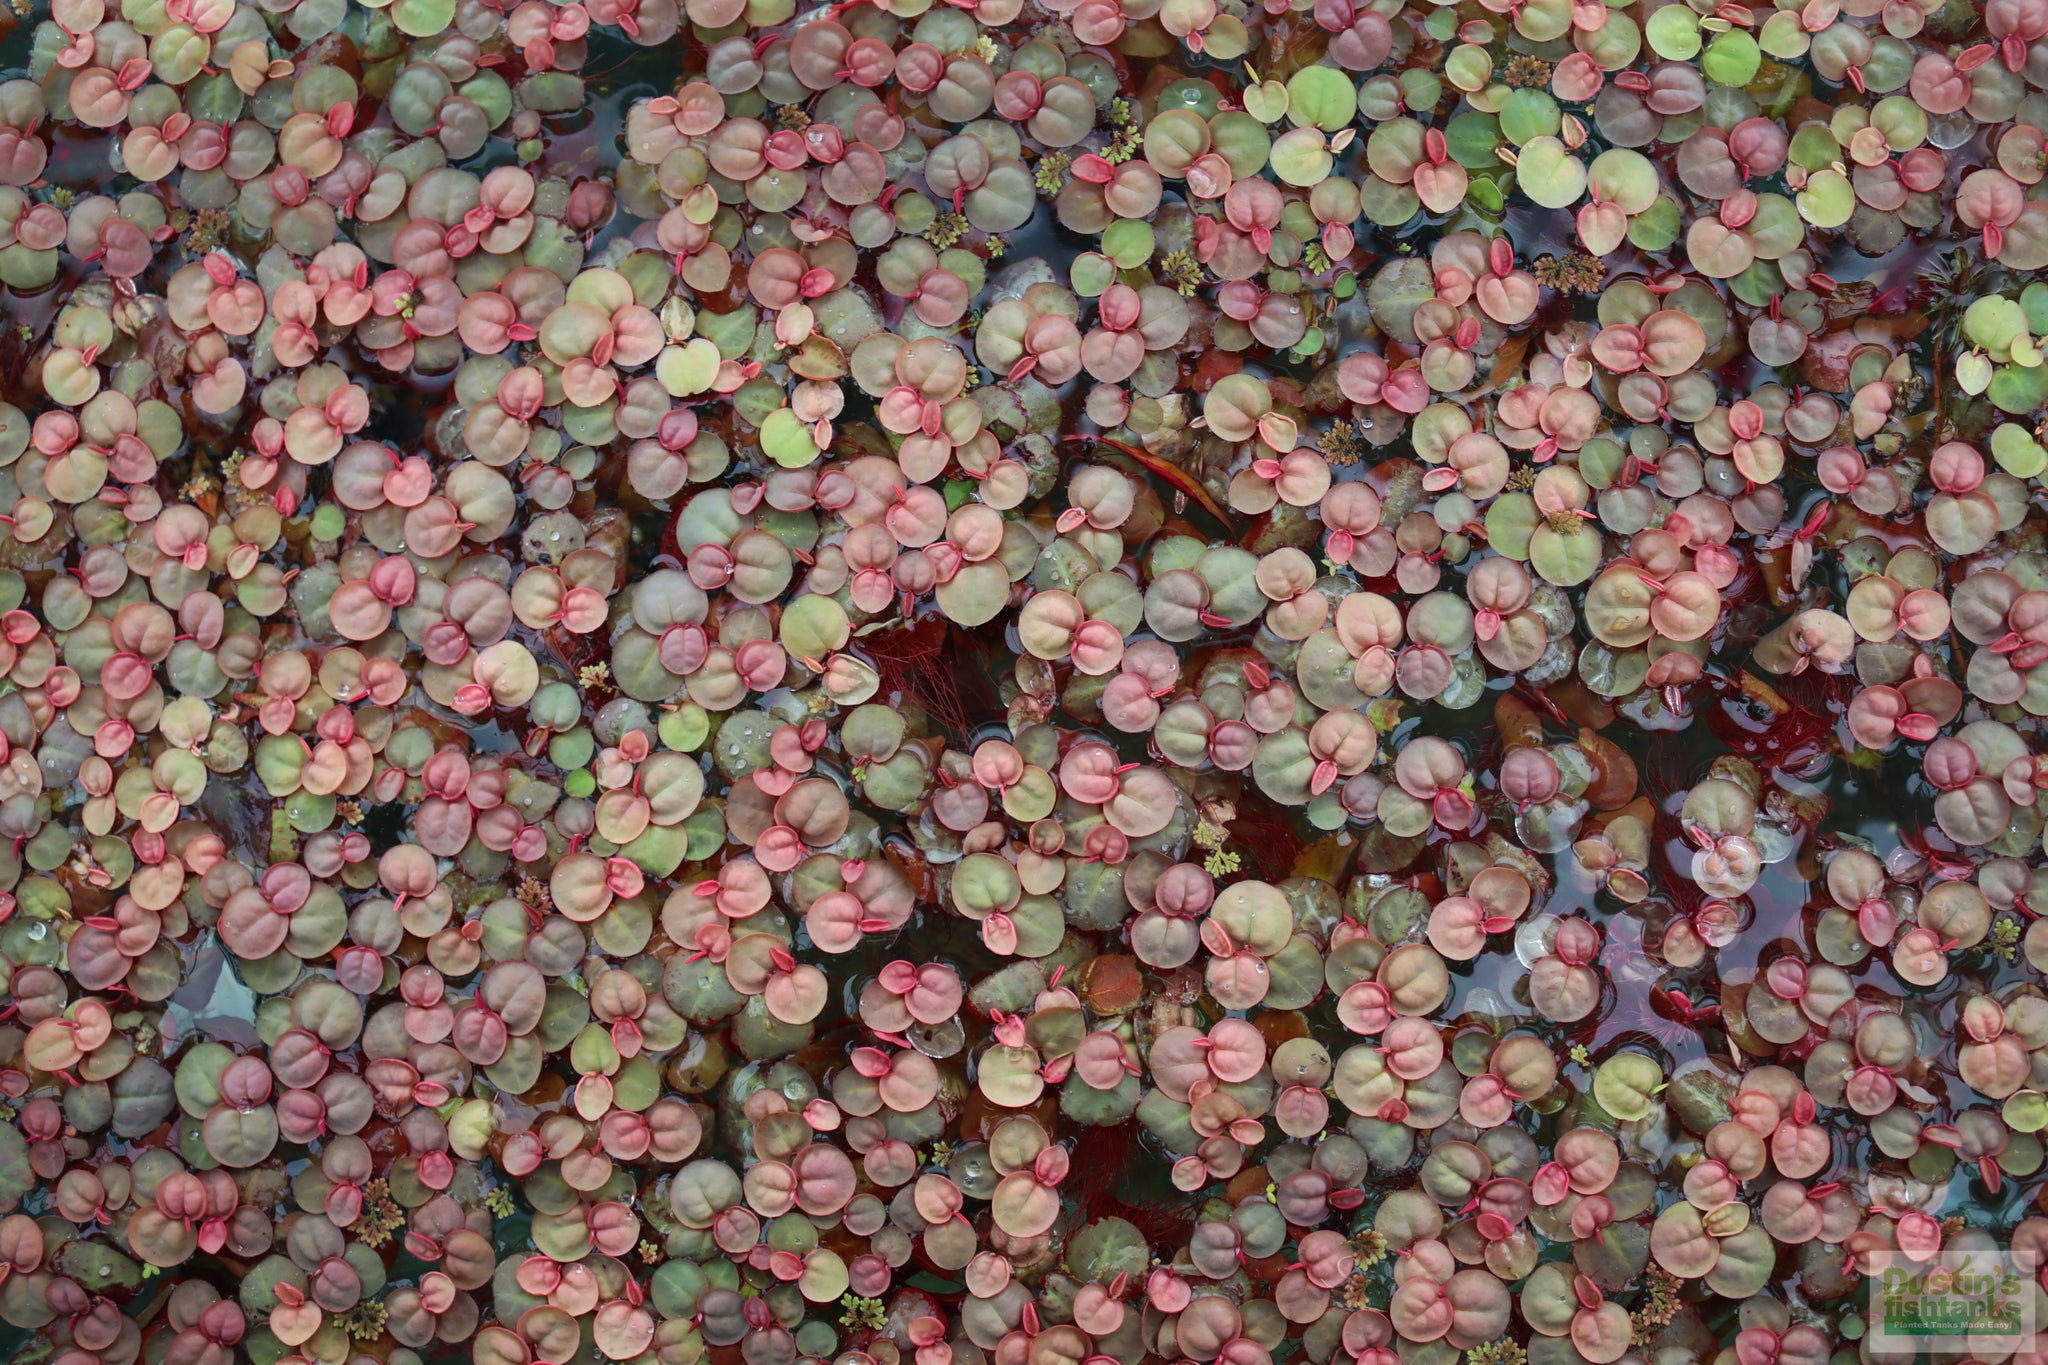  TruBlu Supply Marcus Fish Tanks 15 Leaves Red Root Floaters  Phyllanthus Fluitans Floating Live Aquarium Plant - Buy 2 Get 1 : Pet  Supplies